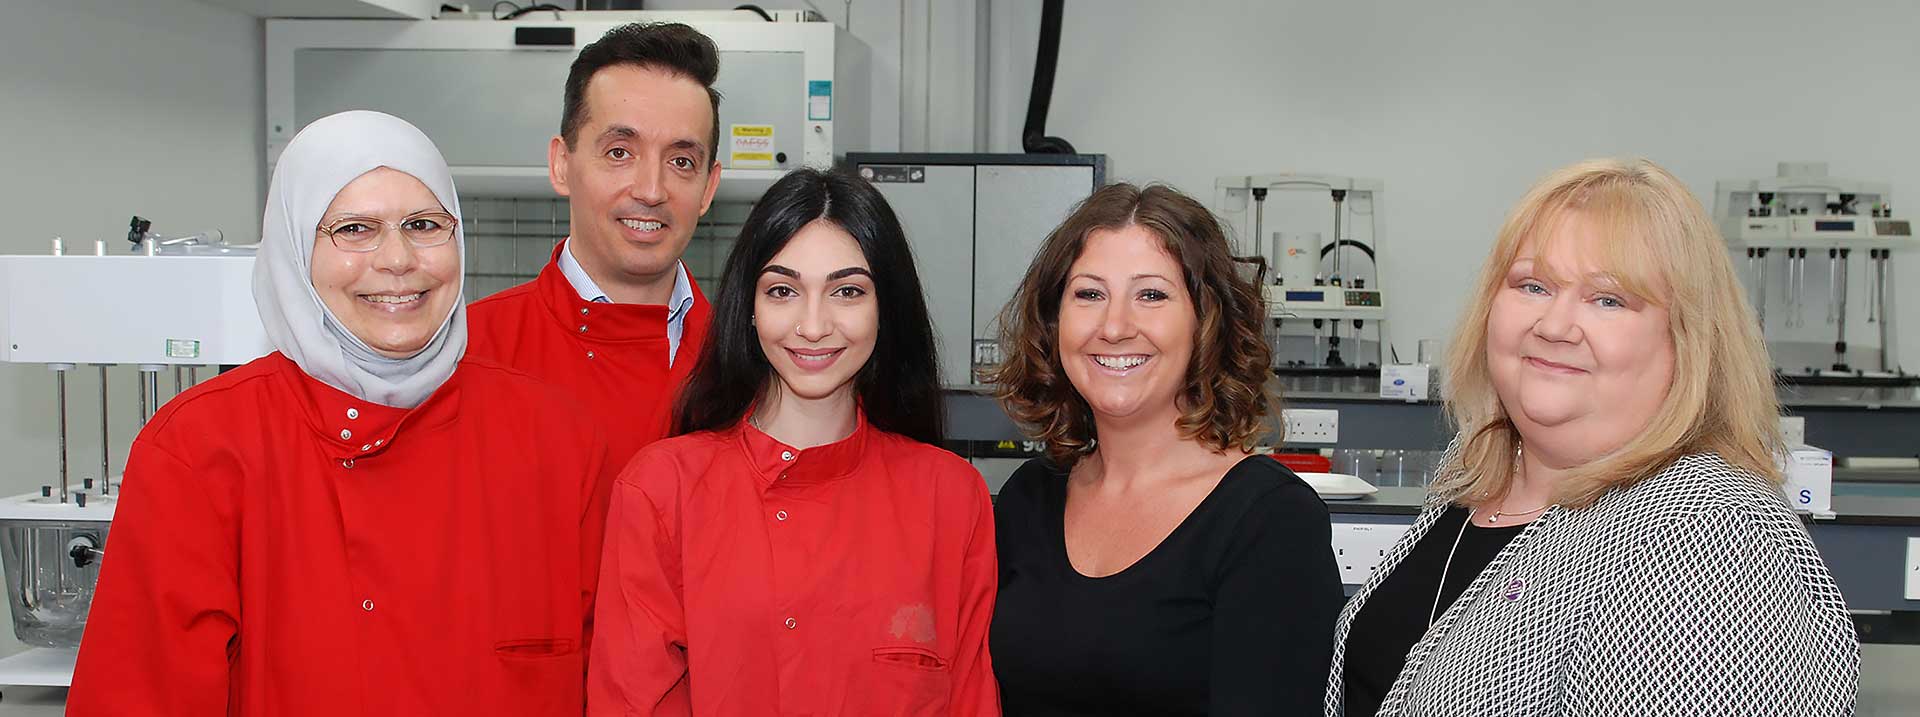 Helen Mervill (second right) and Pam Thornes (far right) from the Laura Crane Youth Cancer Trust pictured with Postdoctoral Research Assistant Khalidah Ibraheem, Dr Nik Georgopoulos and PhD researcher Myria Ioannou, who has been specially appointed to focus the CD40 research into youth cancers.